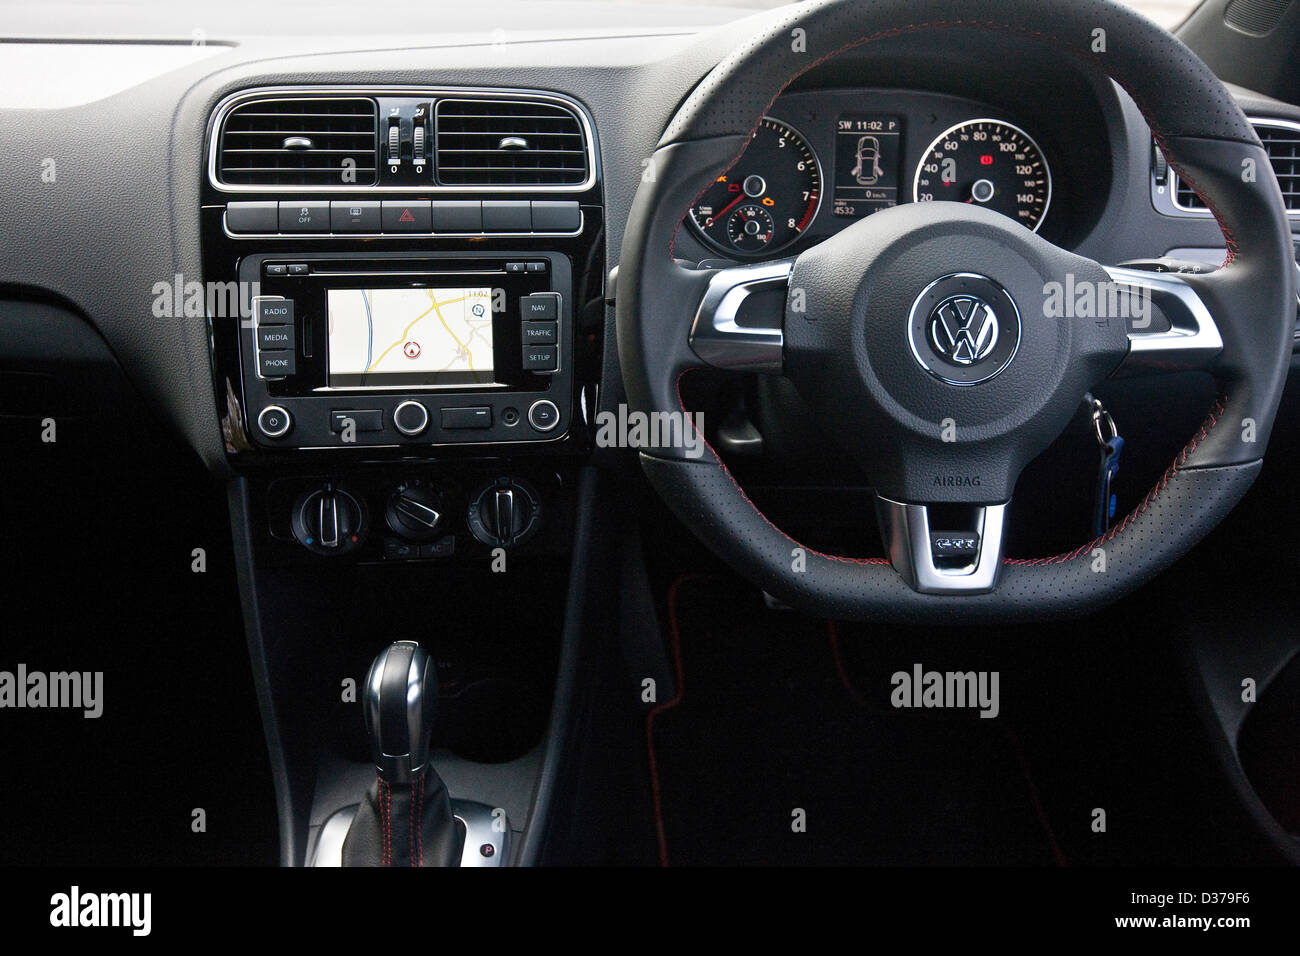 https://c8.alamy.com/comp/D379F6/drivers-controls-and-steering-wheel-in-the-vw-volkswagen-polo-gti-D379F6.jpg